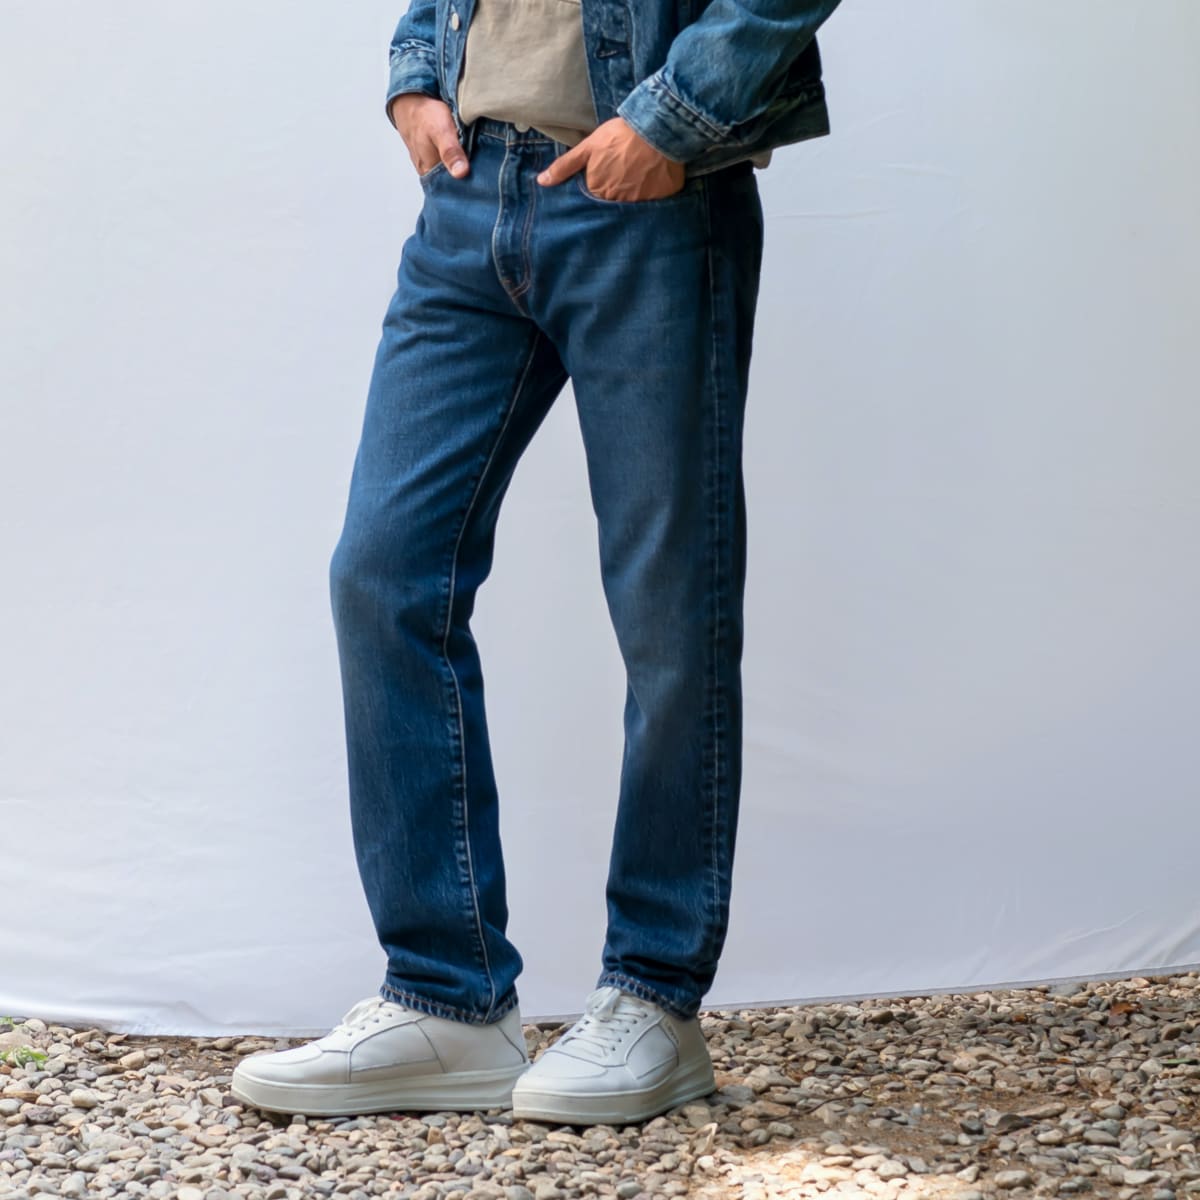 Levi's teams up with Circulose to create its most sustainable pair of jeans  - Acquire